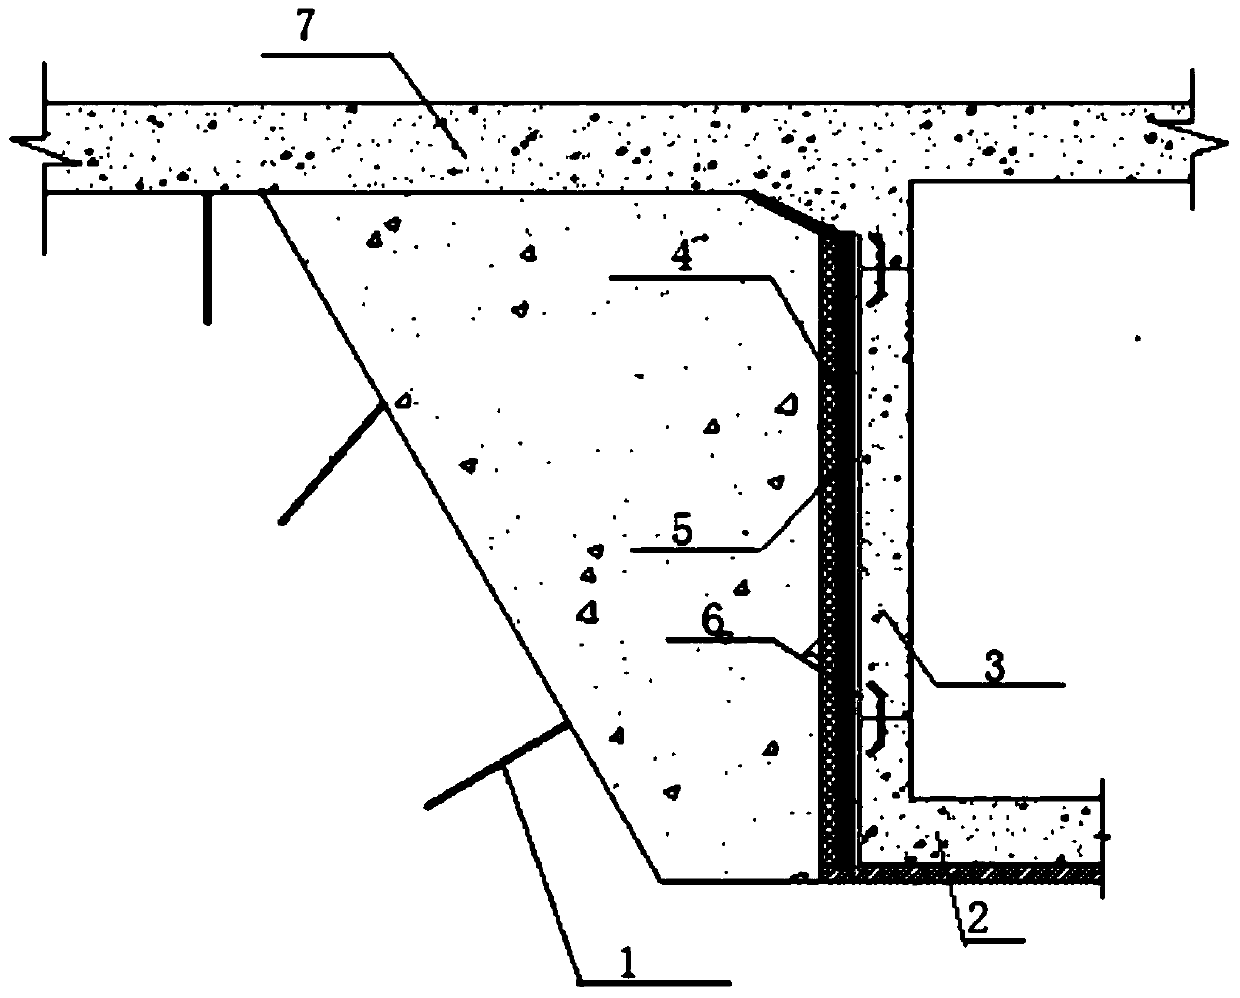 Reverse Construction Method of Adjacent High and Low Floors (Spans) of Basement